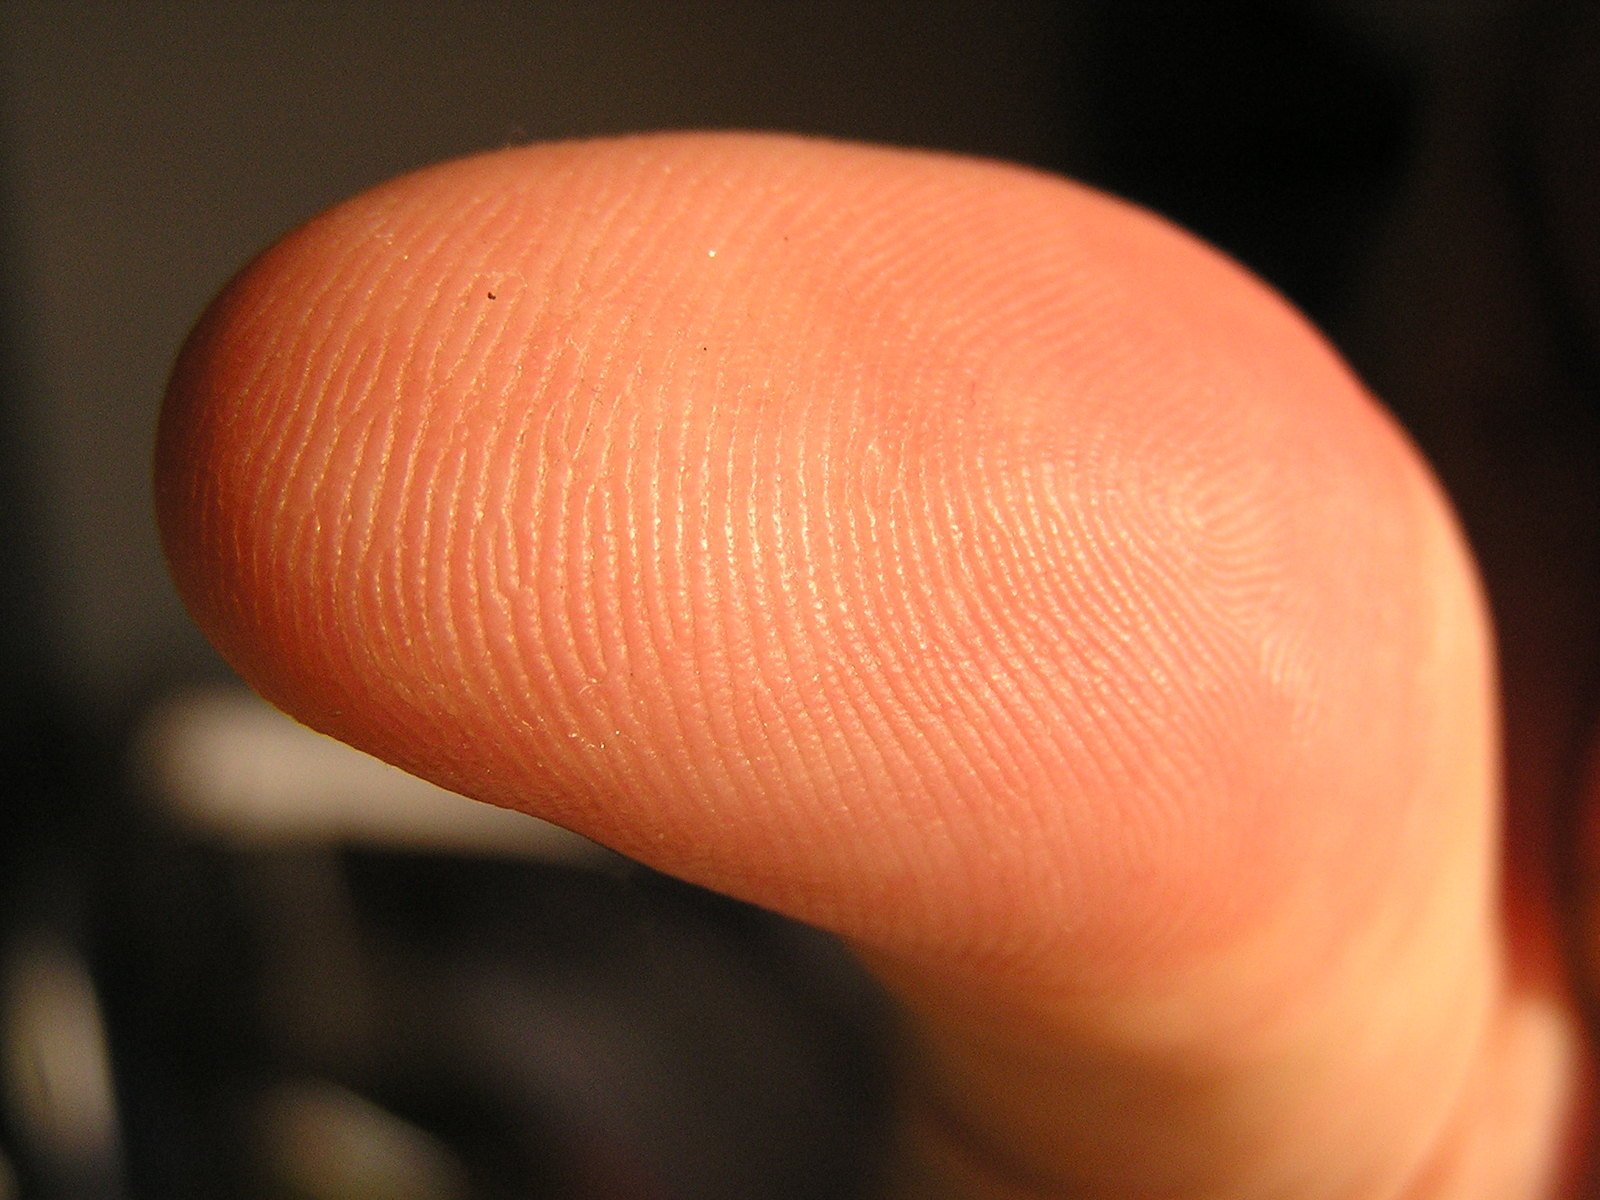 a fingerprint is shown with only one thumb visible